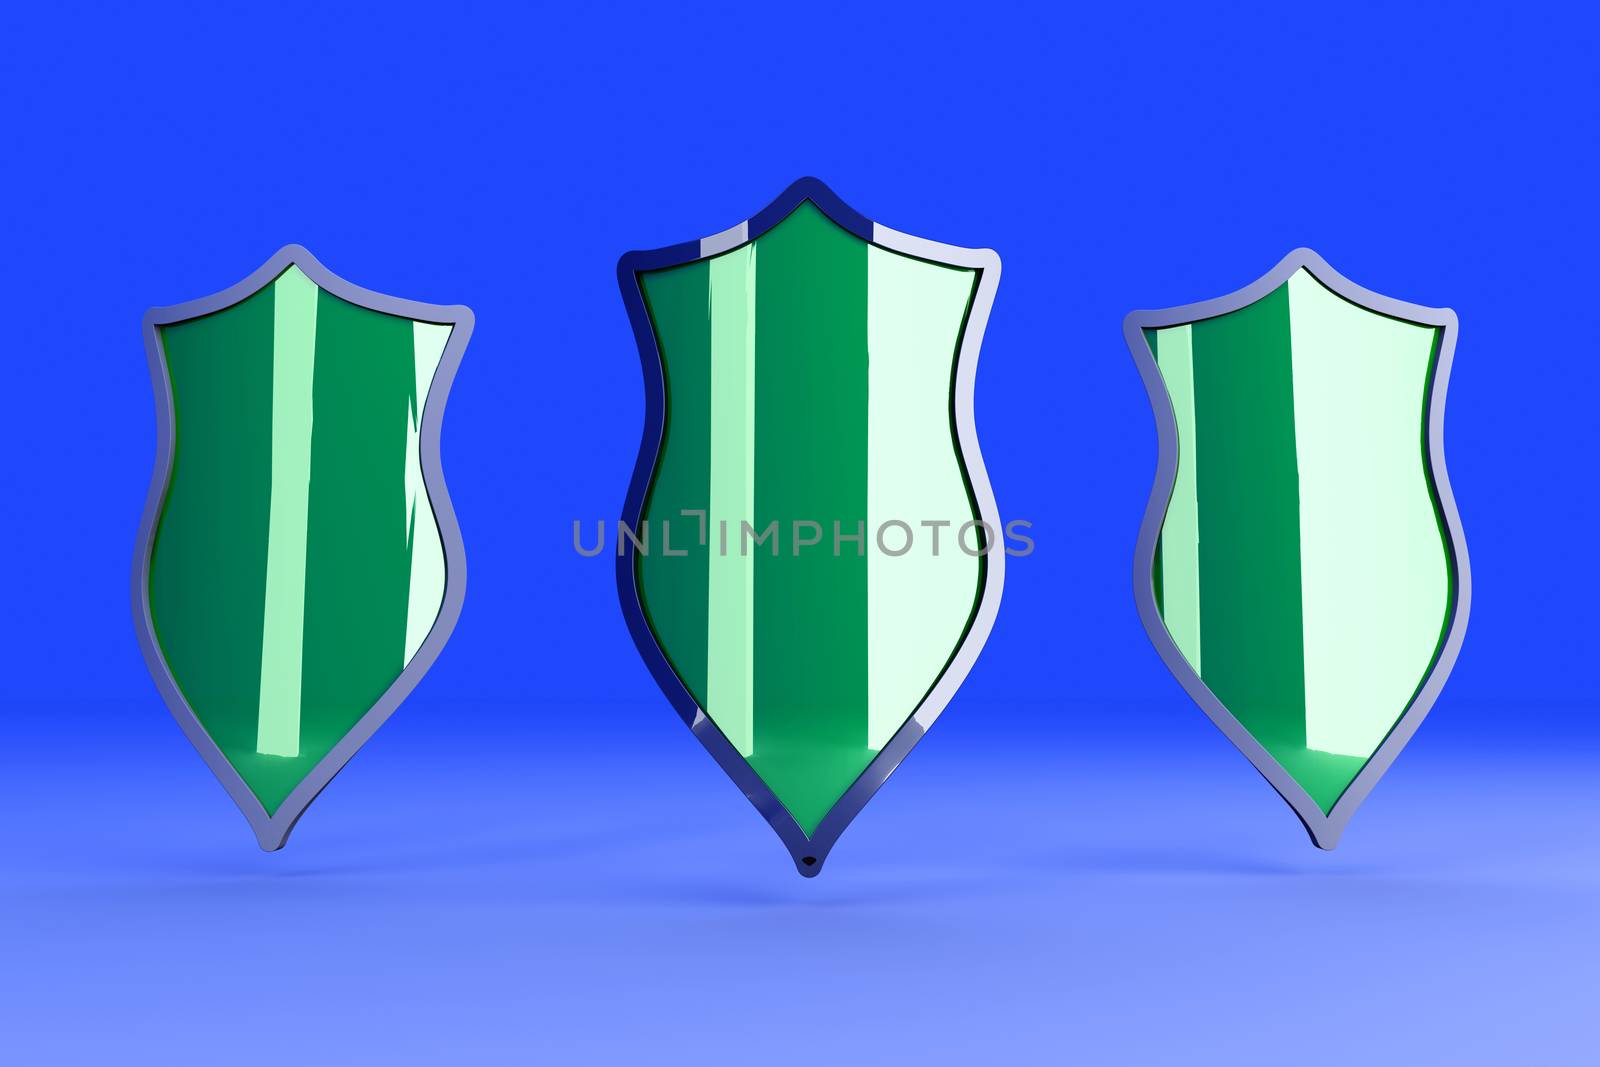 Three Shields for protection. 3D rendered Illustration.